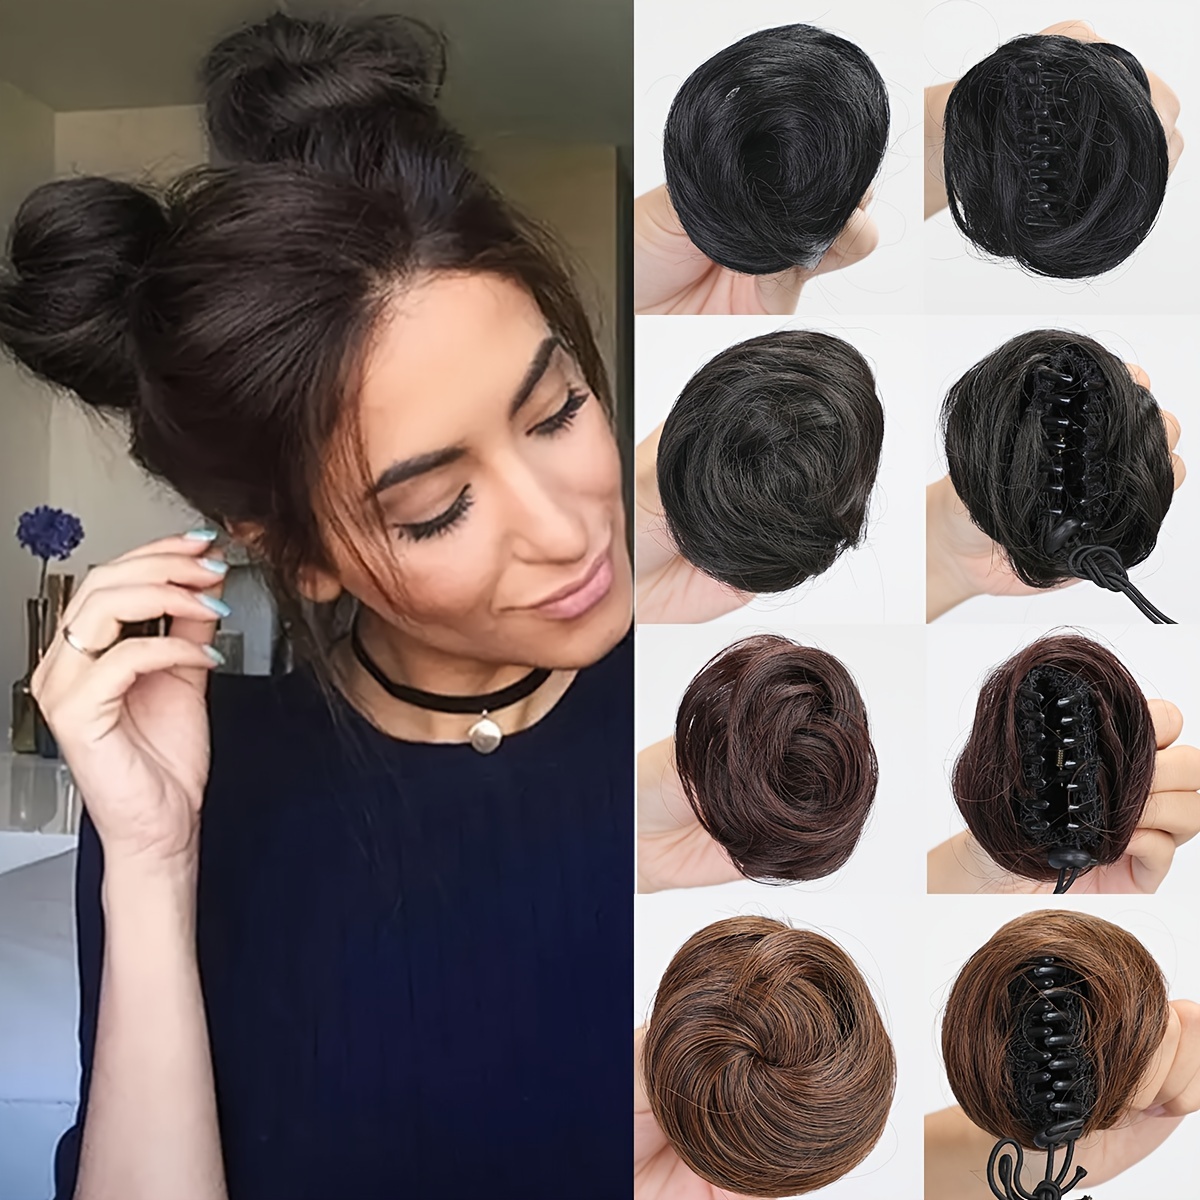 

Claw Messy Hair Buns Tousled Updo Chignon Synthetic Hair Extensions Elegant For Daily Use Hair Accessories